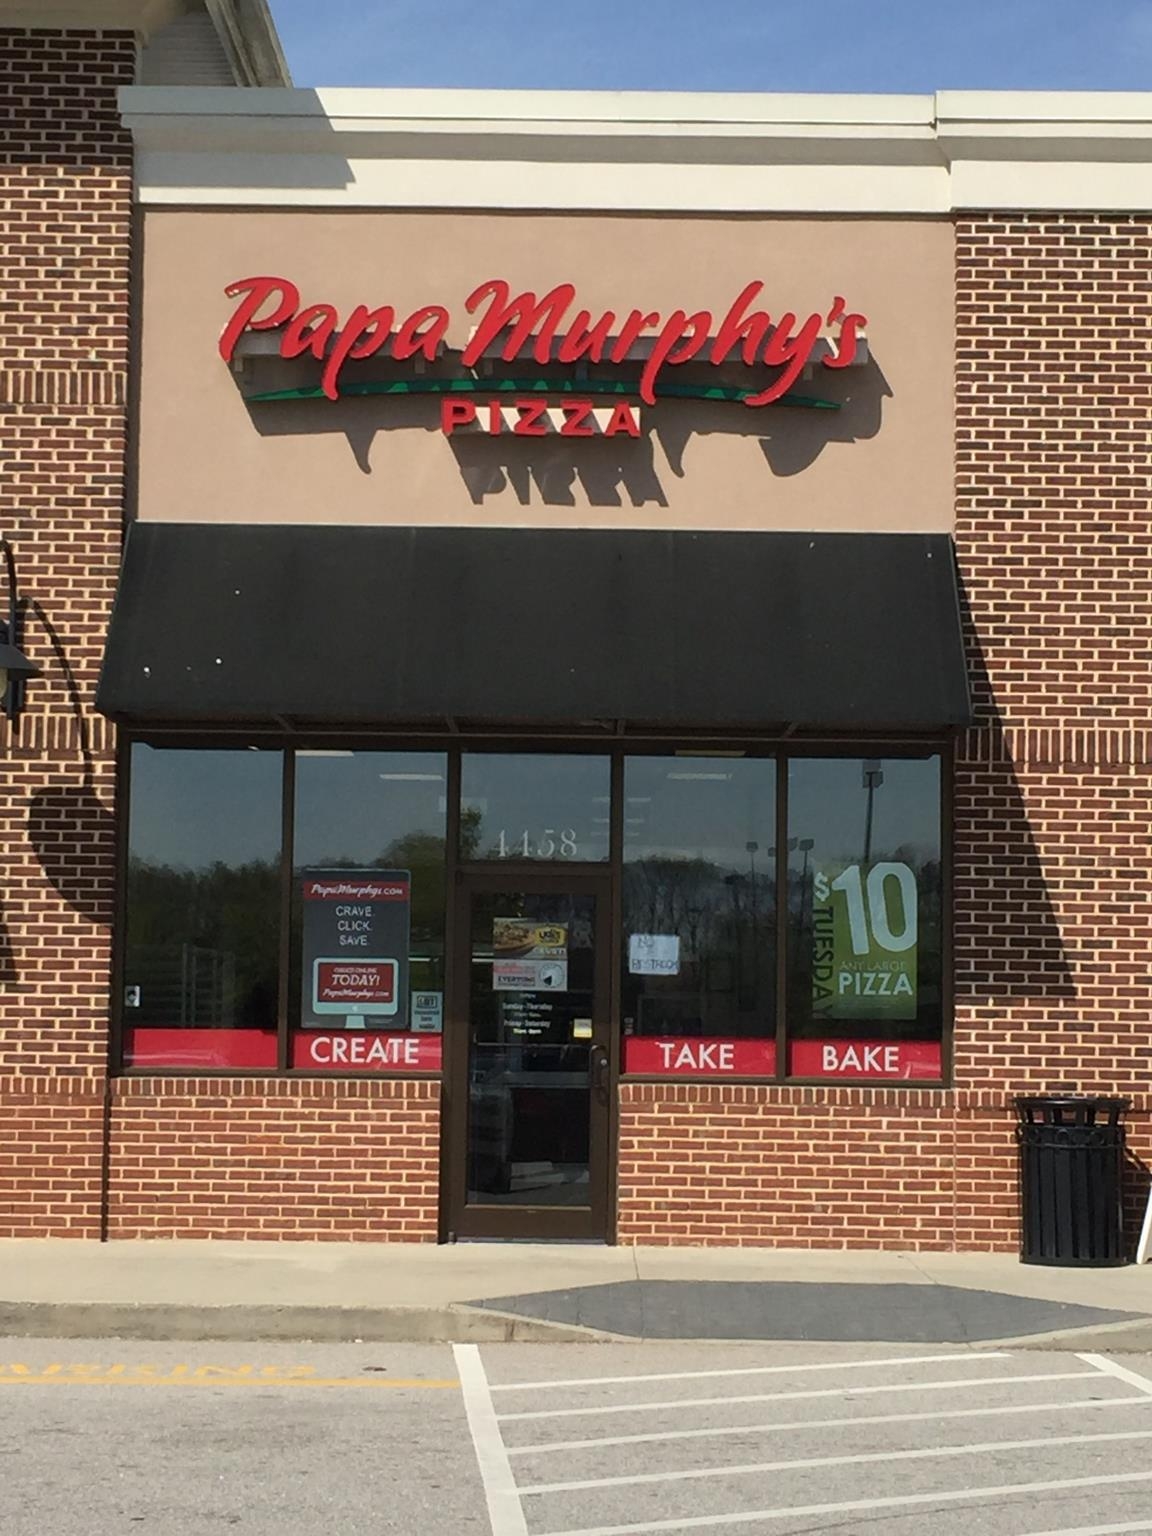 Business Lettering on Pizza Outlet